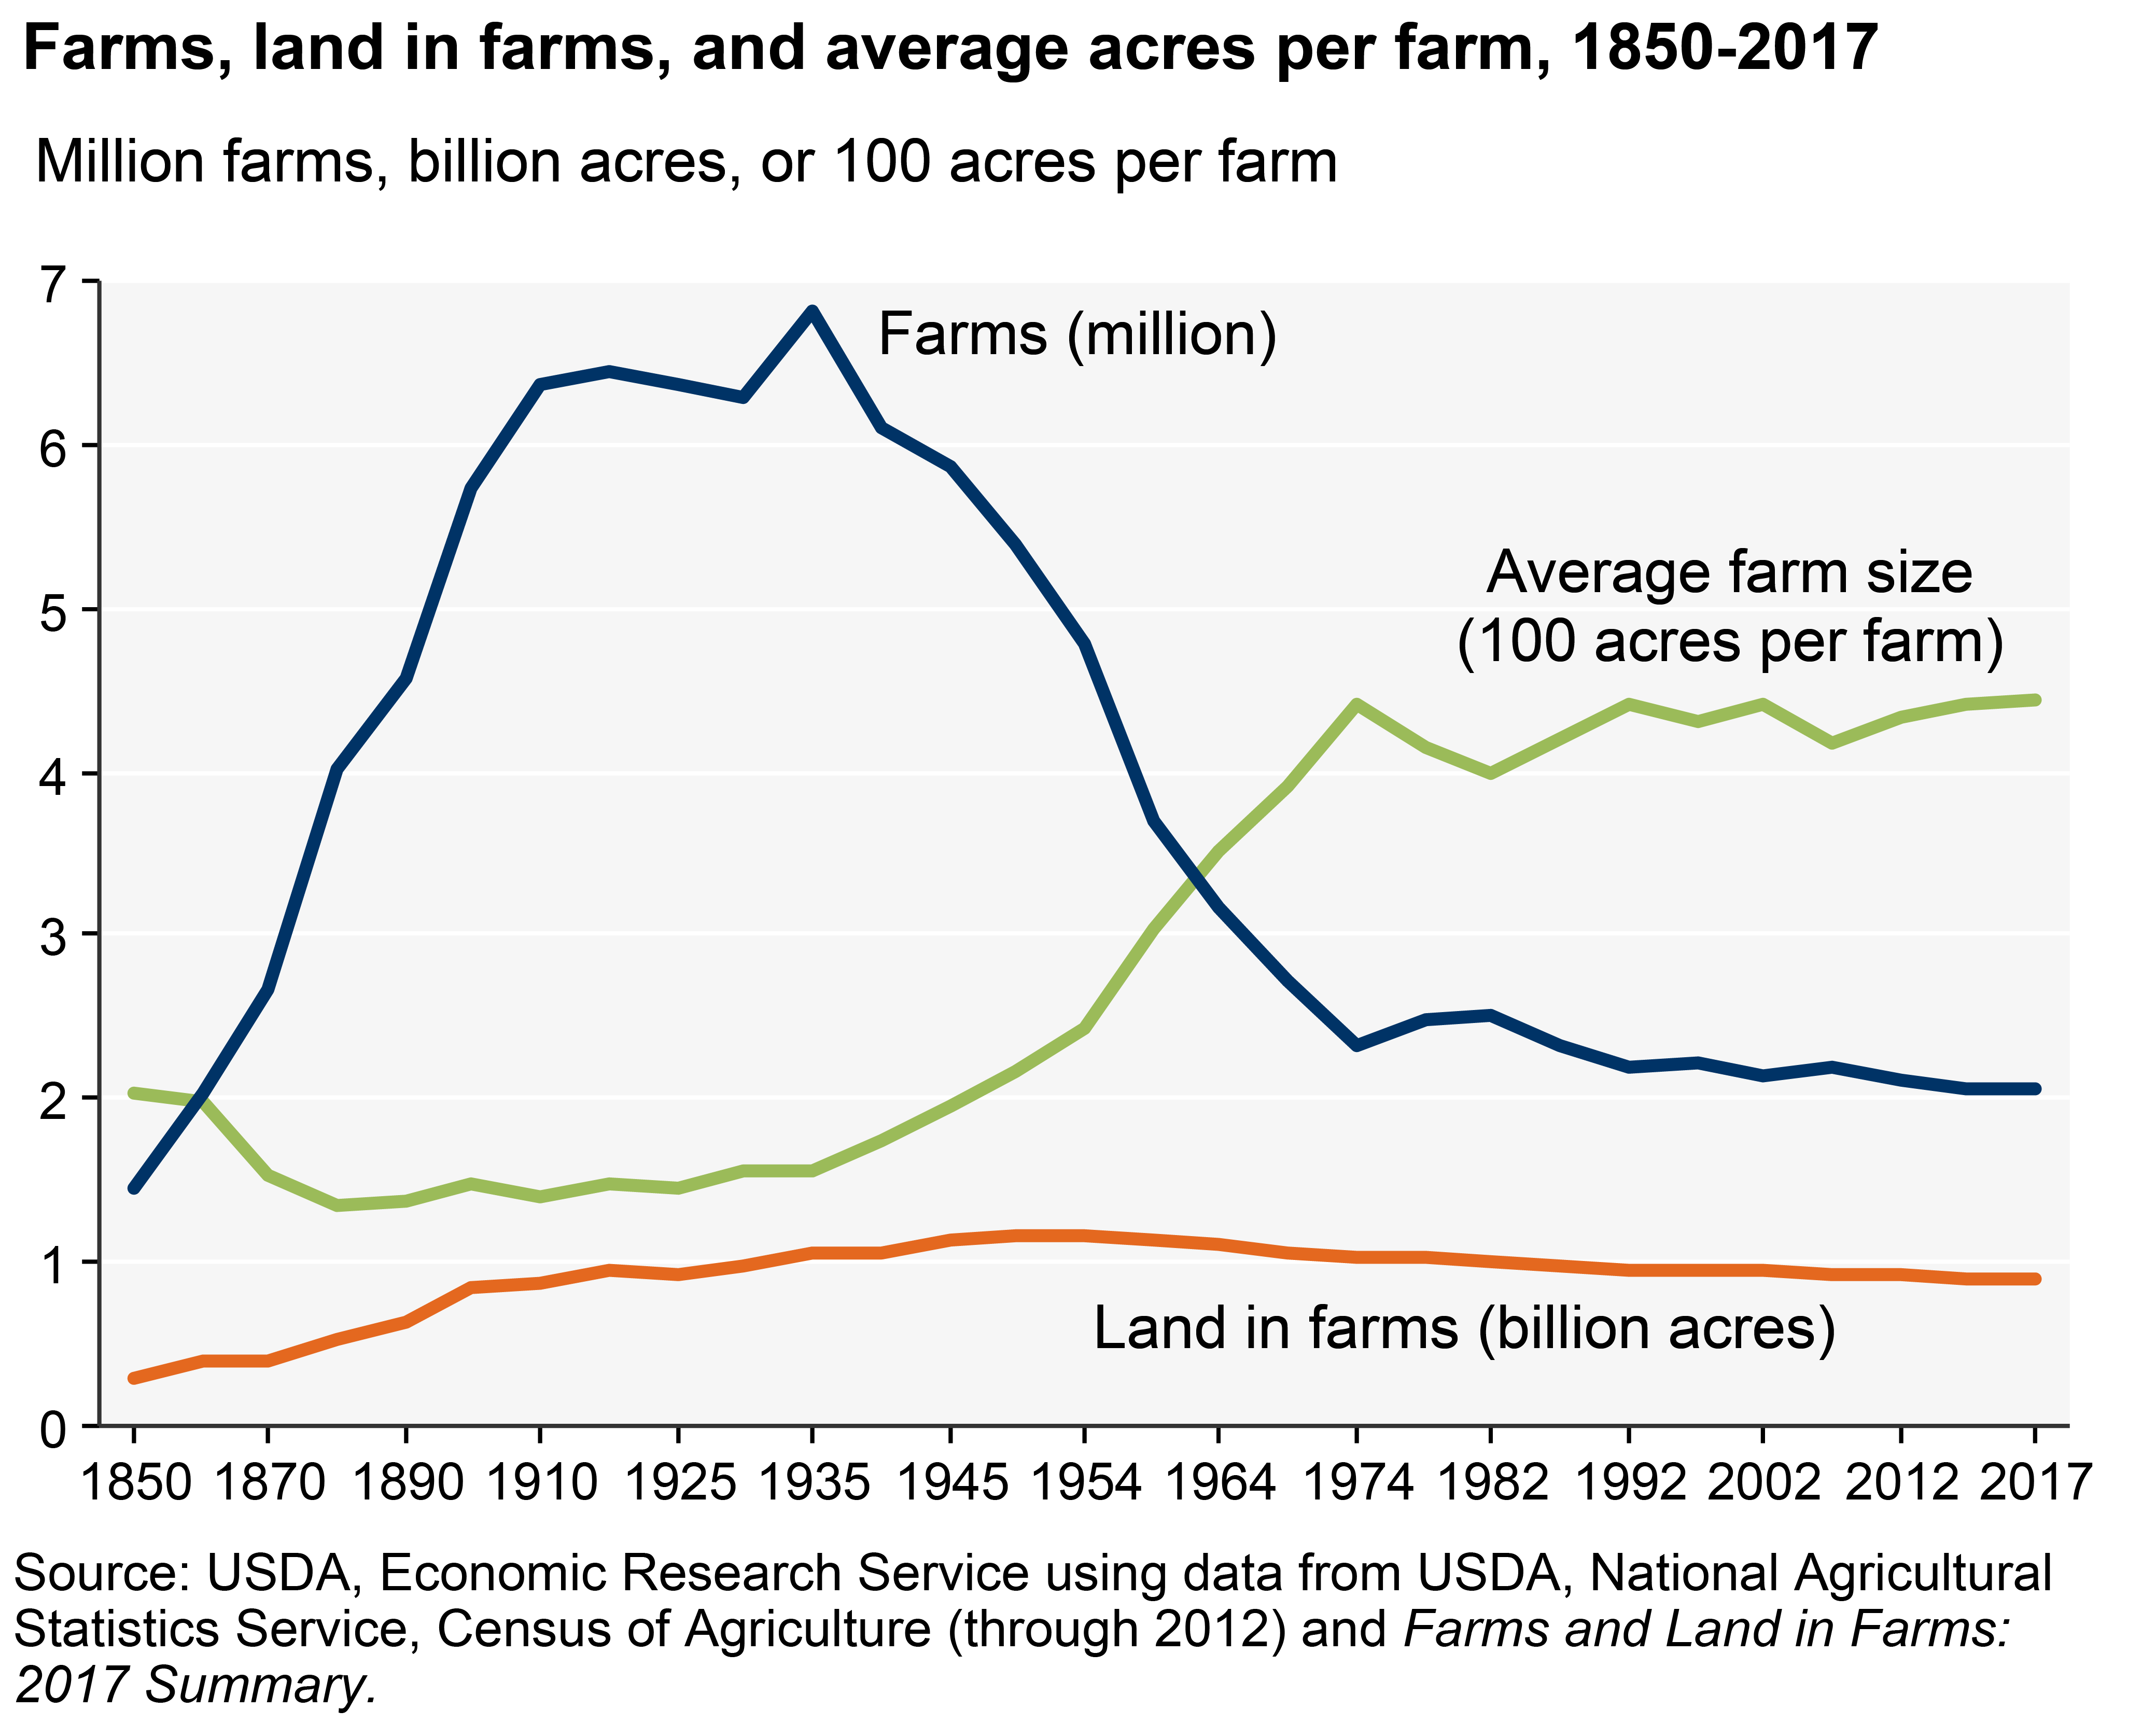 US Agriculture Needs a 21stCentury New Deal